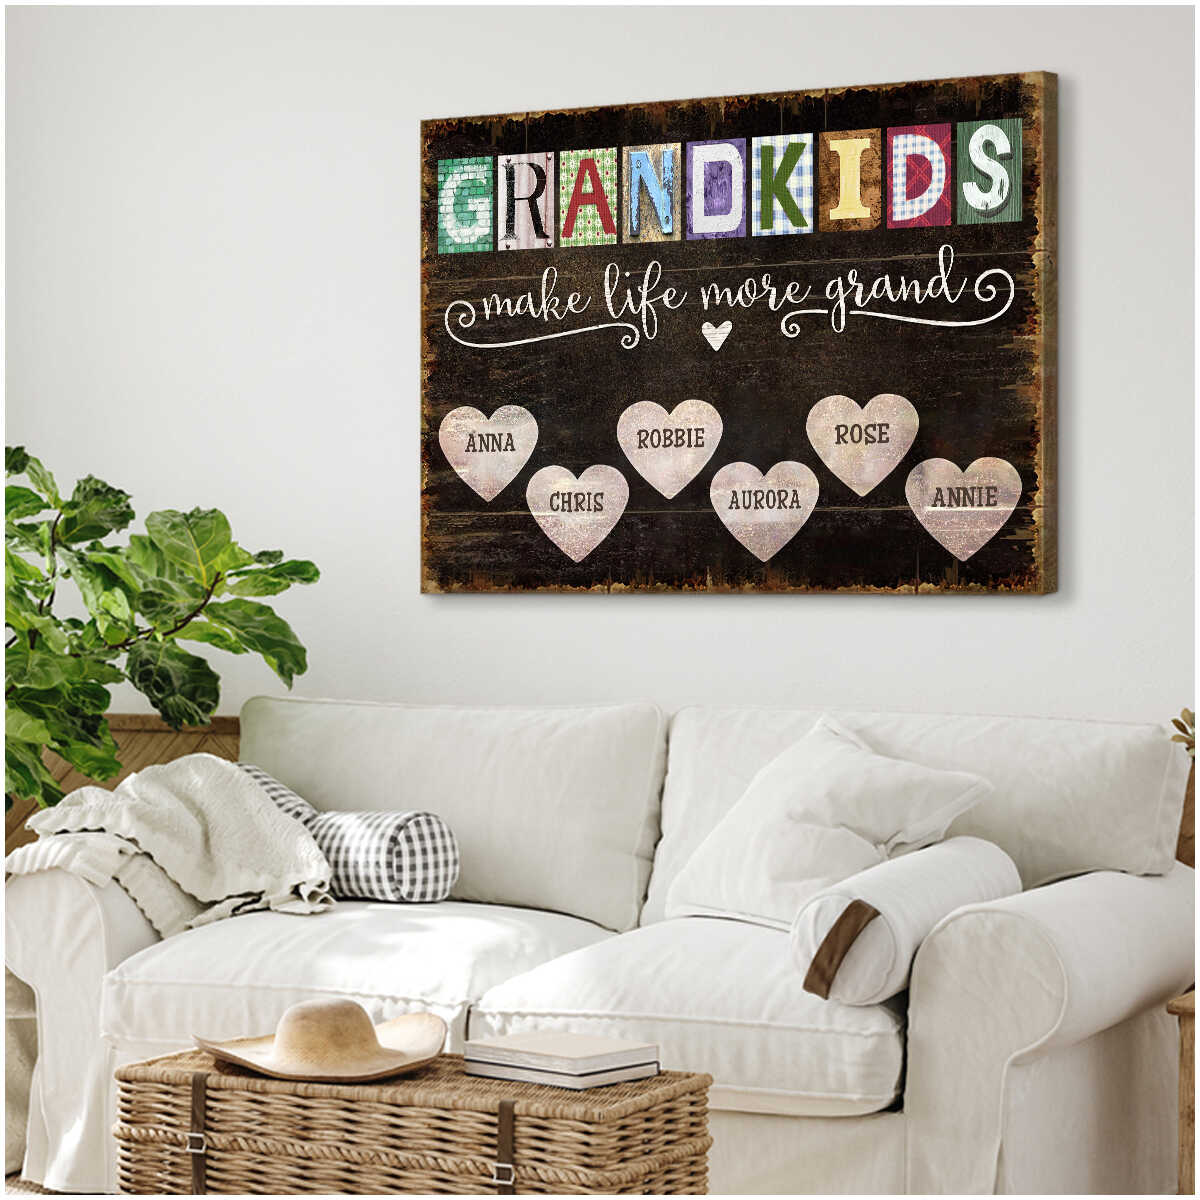 Grandma Gifts, Personalized Grandma's Photo, Mother's Day Gift, Gift For  Mom Canvas, Custom The Best Grandma Belongs To Me Canvas